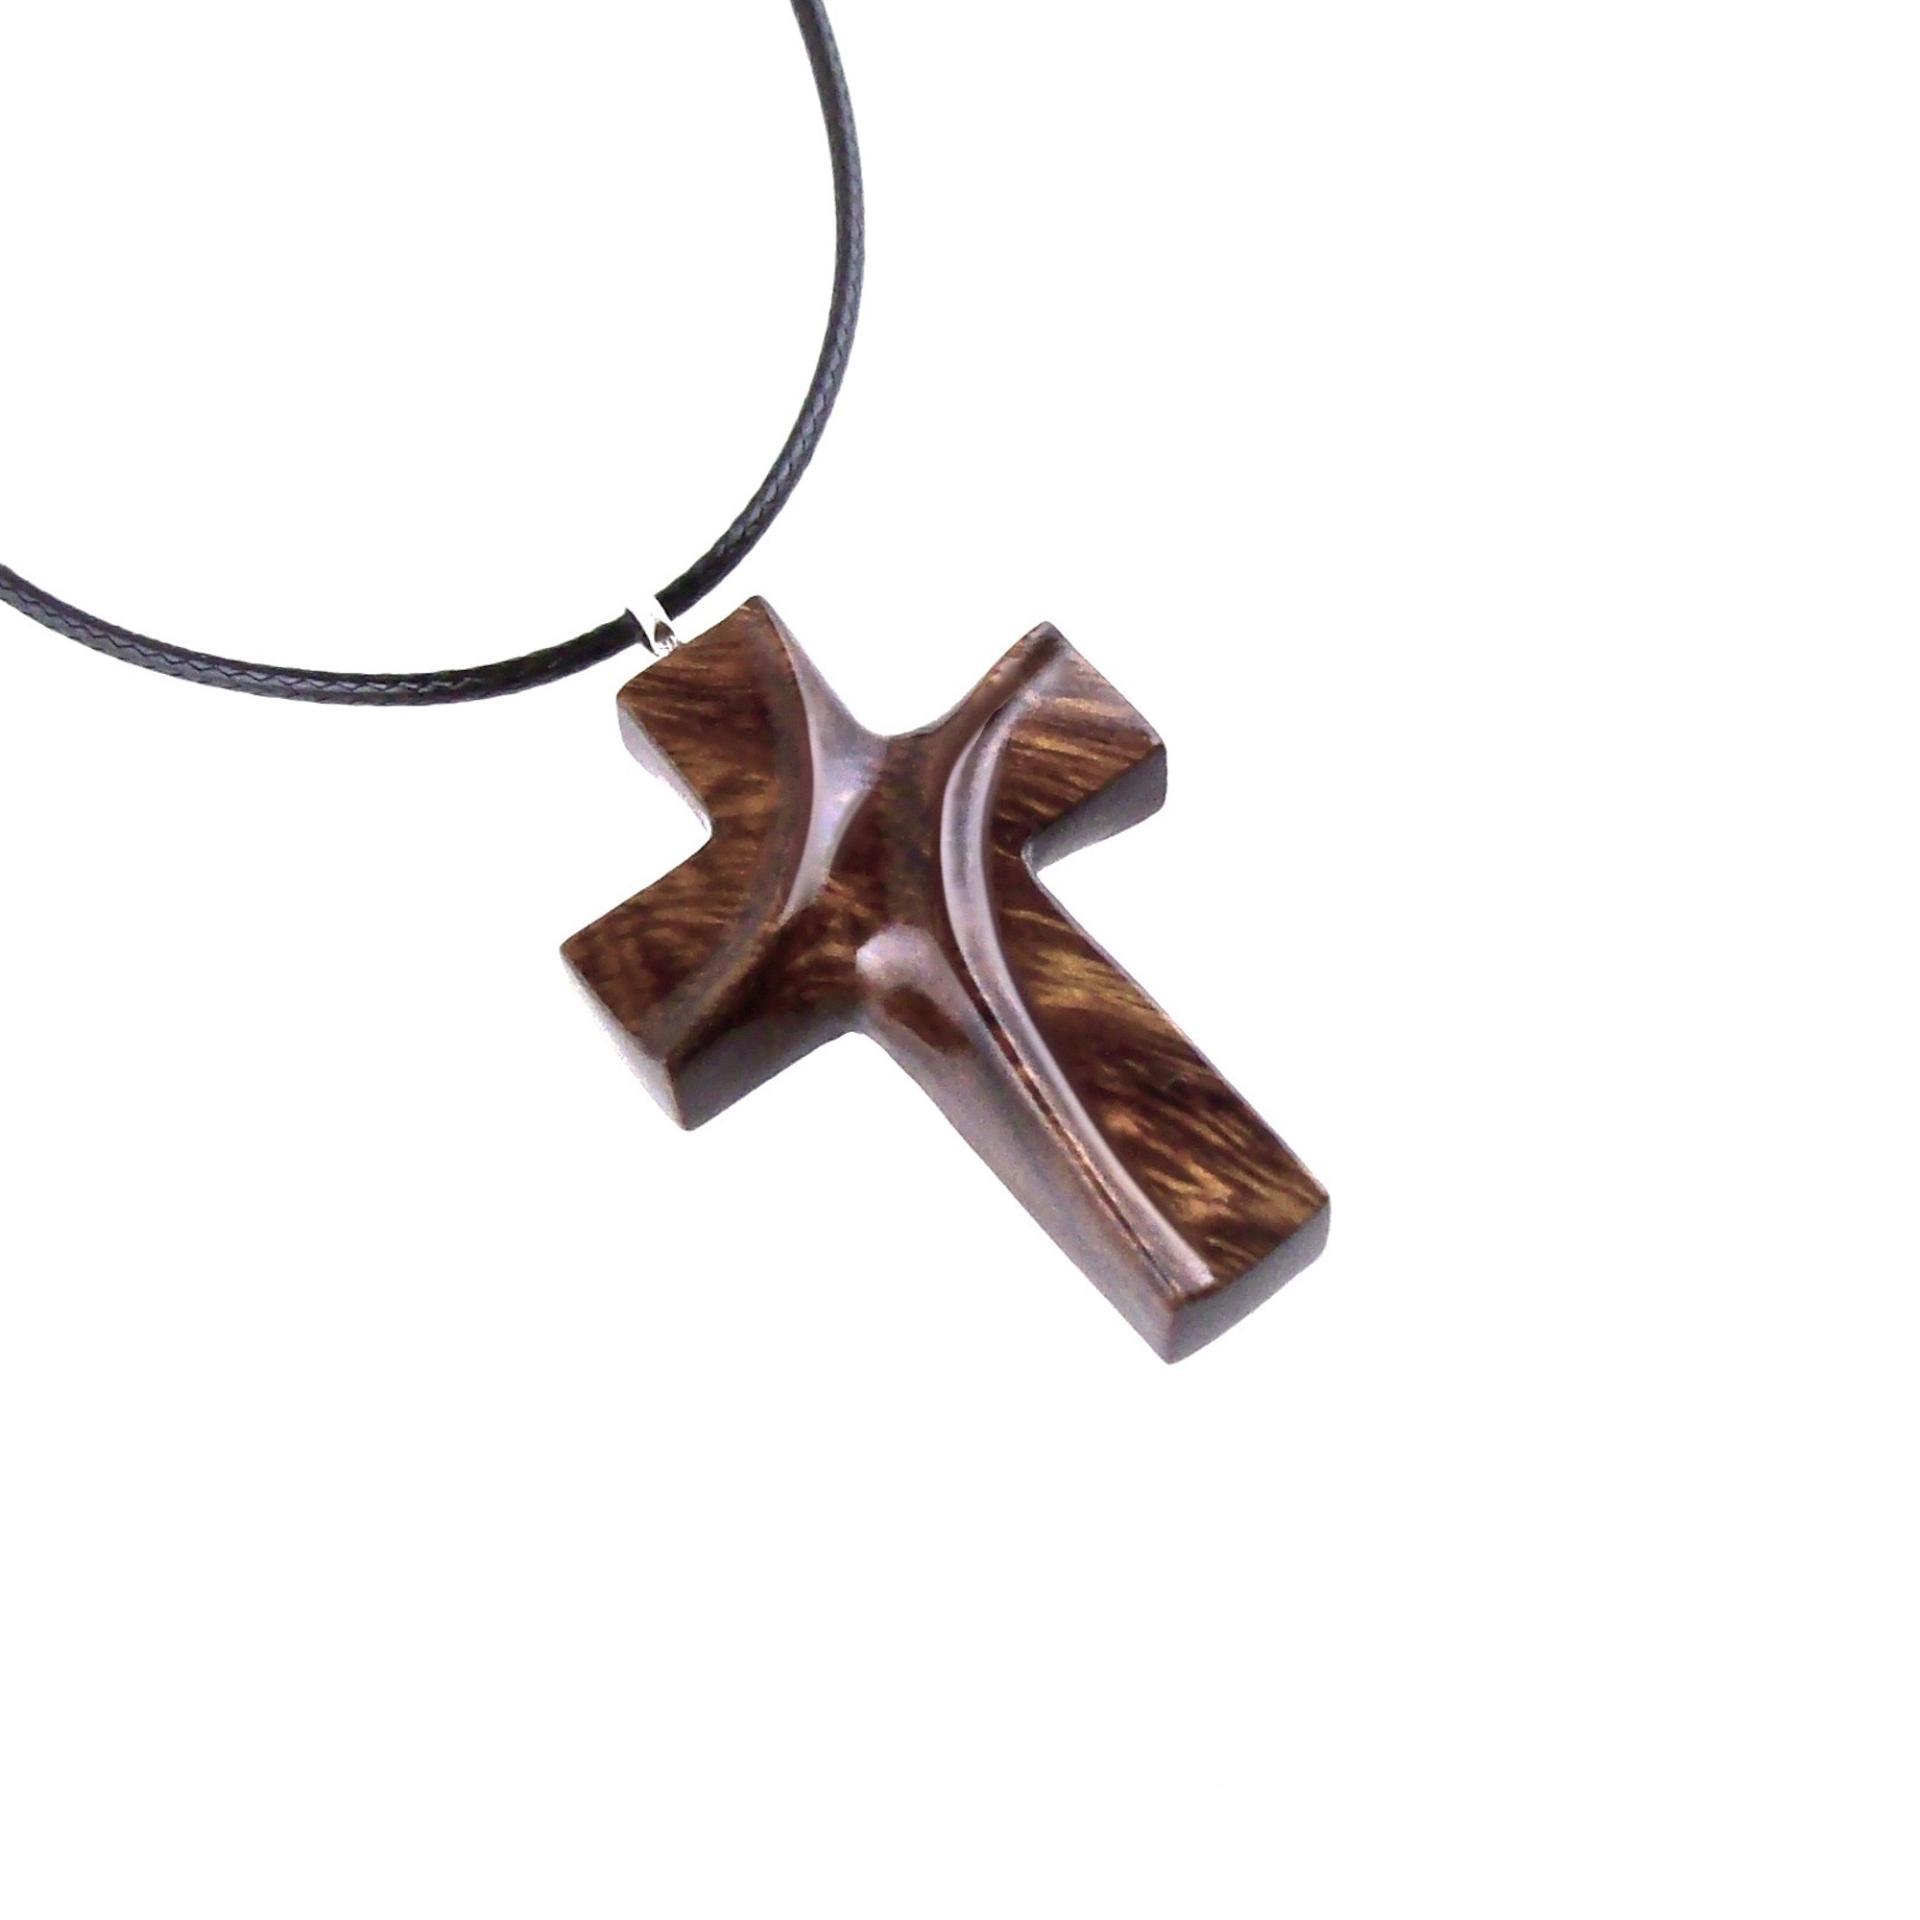 Wood Cross Necklace, Hand Carved Wooden Cross Pendant for Men Women, Handmade Christian Jewelry Gift for Him Her